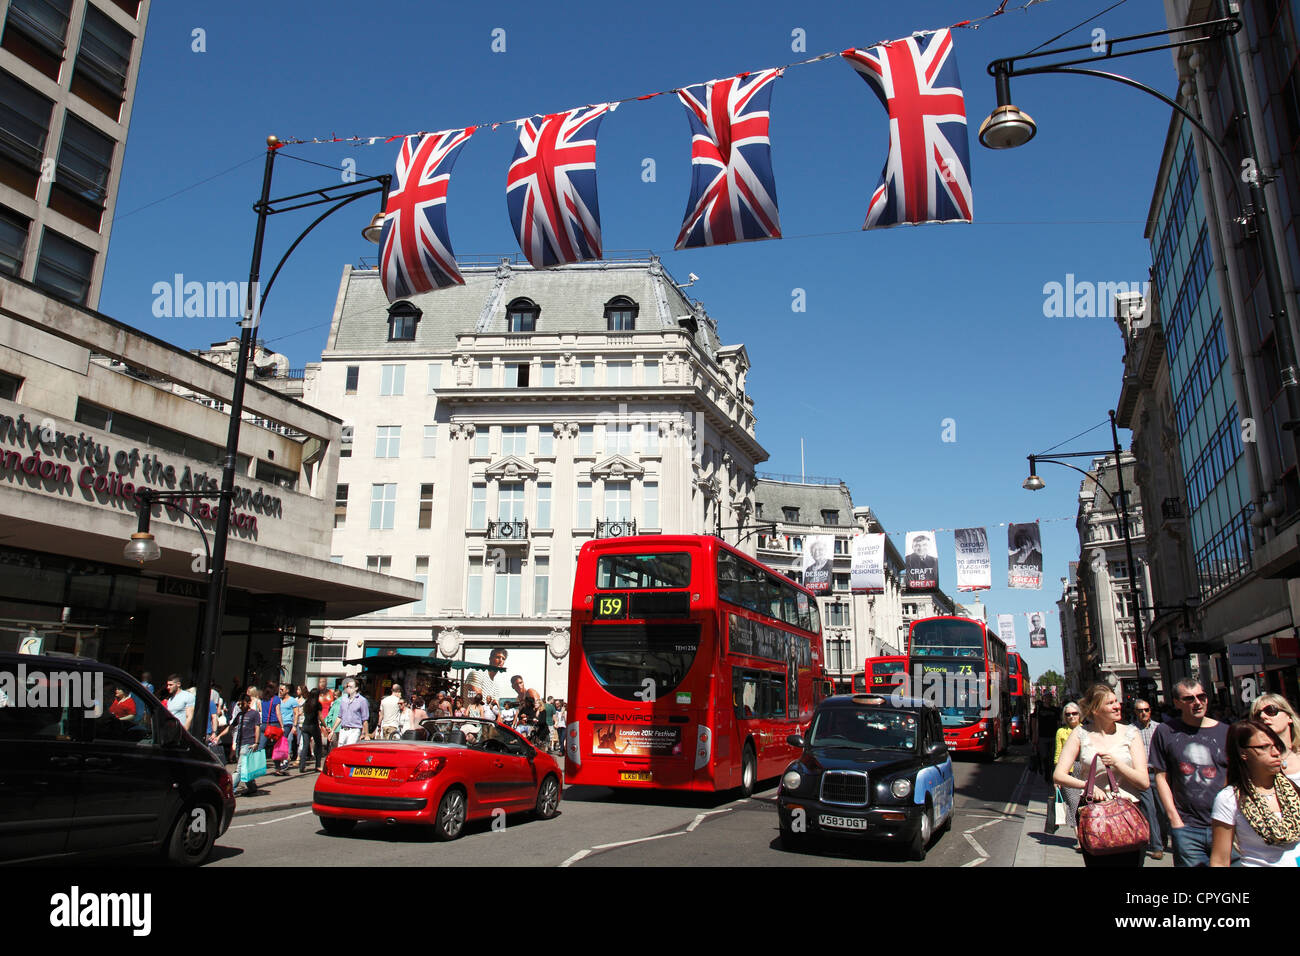 Oxford Street, Londres, Angleterre, Royaume-Uni Banque D'Images